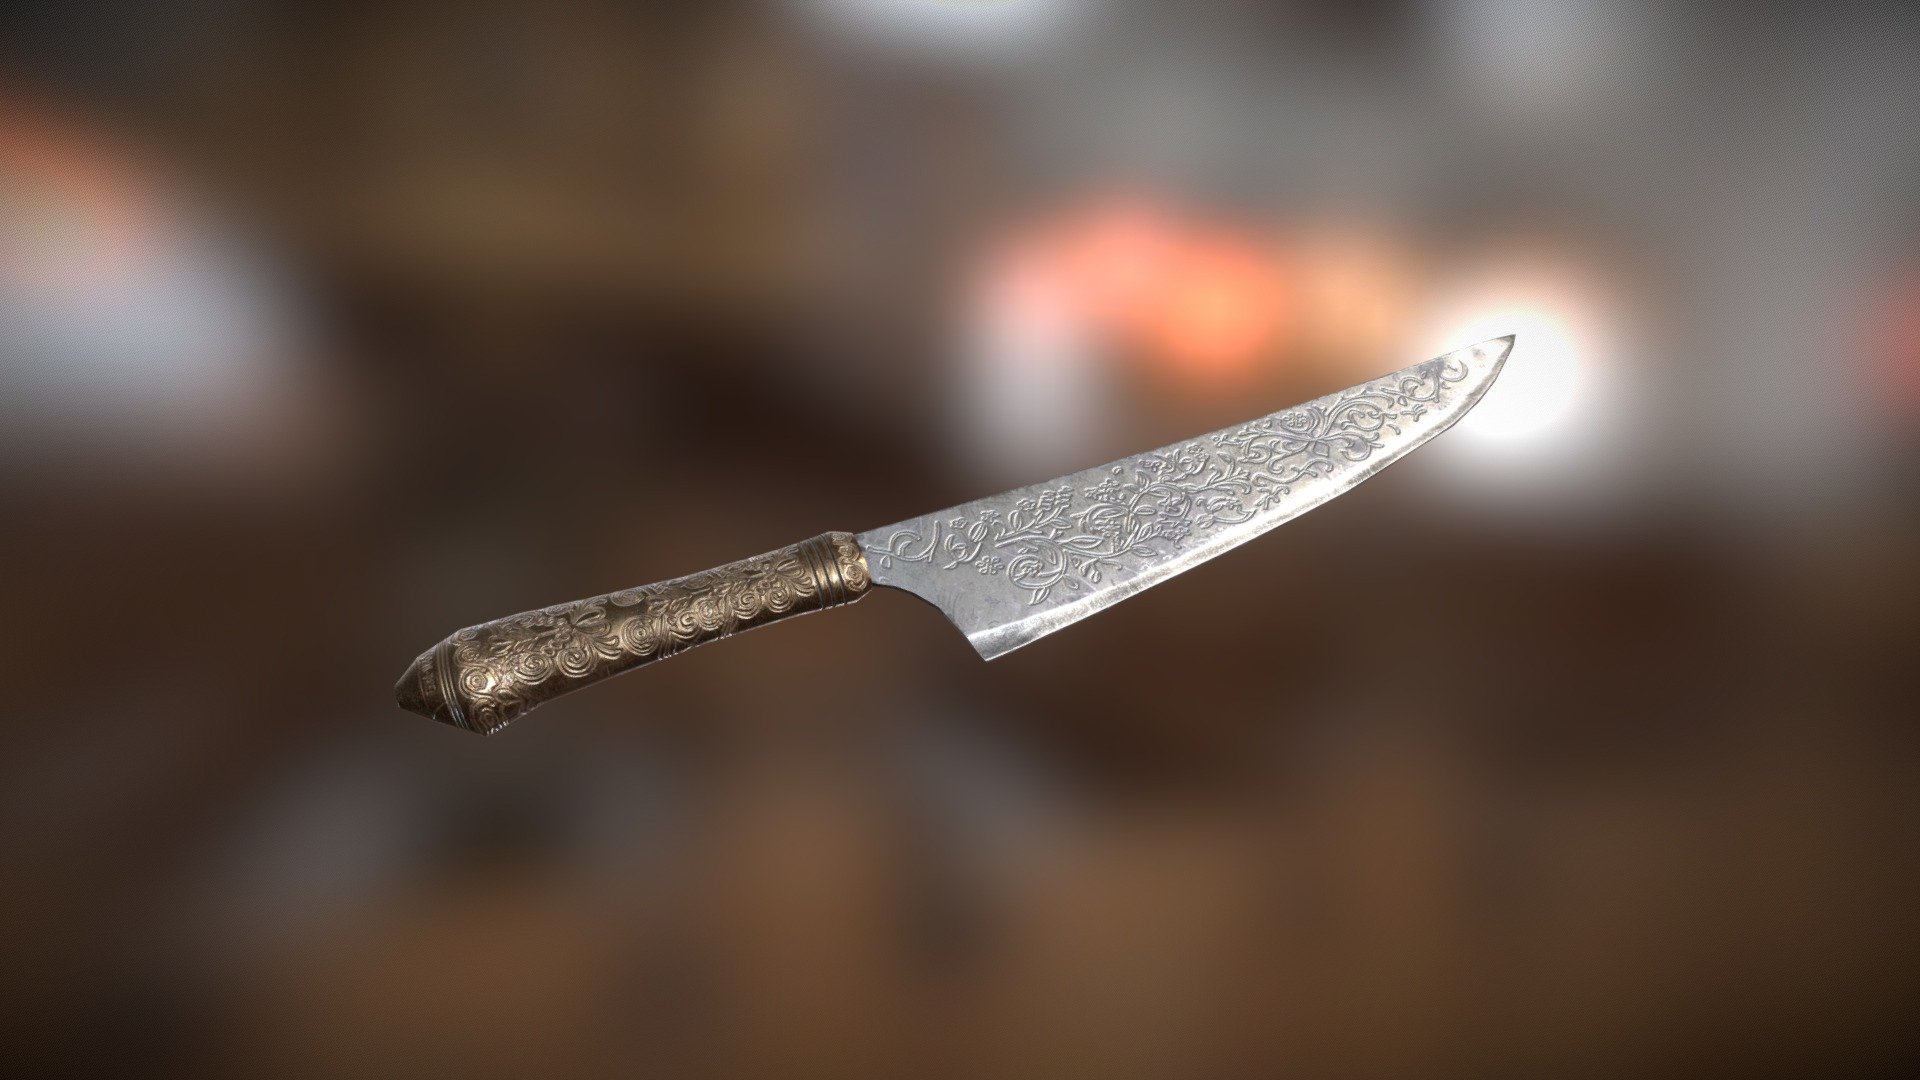 Vorpal Blade based on the videogame Alice: Madness Returns, designed in Blender and textured with Substamce Painter.

I found the stencils for the engravings from here: https://www.red-lilly.com/wp-content/uploads/2017/01/2en-1.jpg - Vorpal Blade - 3D model by Billykid 3d model